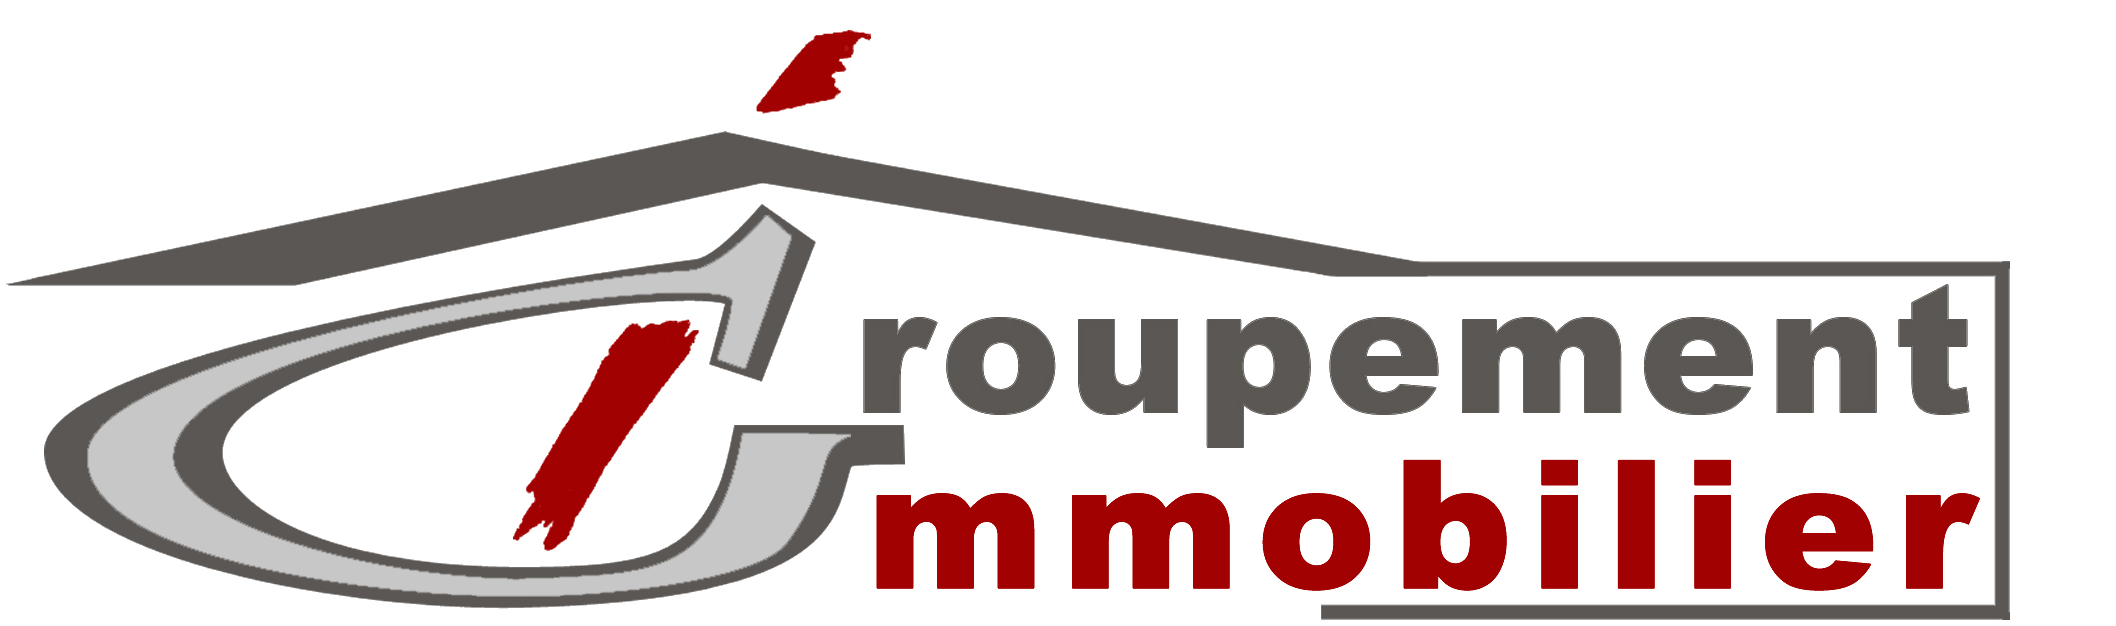 Groupement Immobilier Logo Reseau Agence Immobiliere Independante